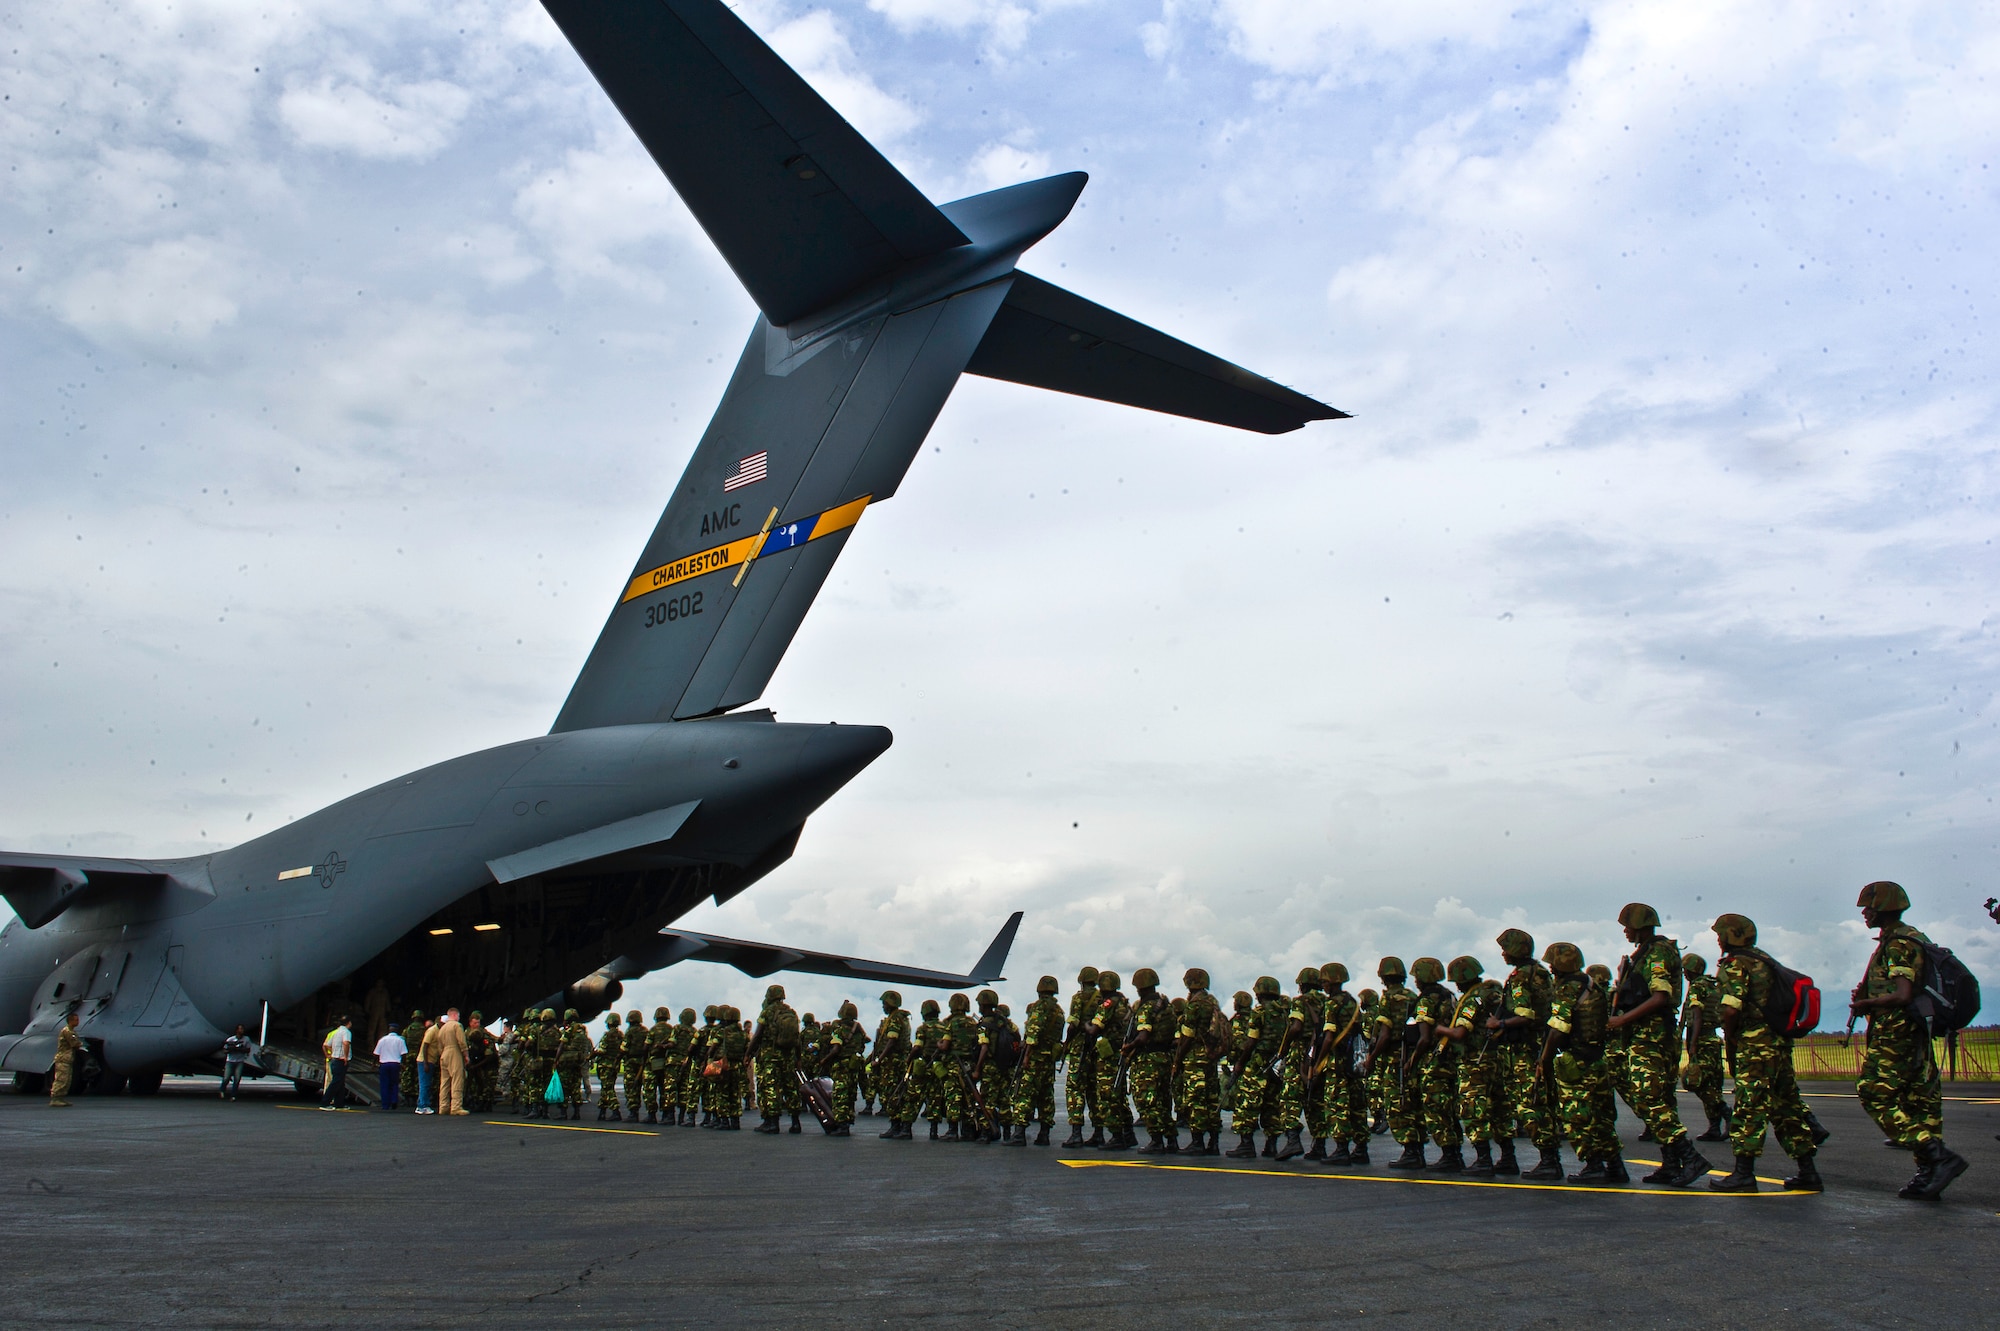 Burundi soldiers prepare to load onto a C-17 Globemaster Dec. 13, 2013 at Bujmumbura Airport, Burundi. In coordination with the French military and African Union, the U.S. military provided airlift support to transport Burundi soldiers, food and supplies in the Central African Republic. This support is aimed at enabling African forces to deploy promptly to prevent further spread of sectarian violence and restore security in CAR. (U.S. Air Force photo/Staff Sgt. Erik Cardenas)